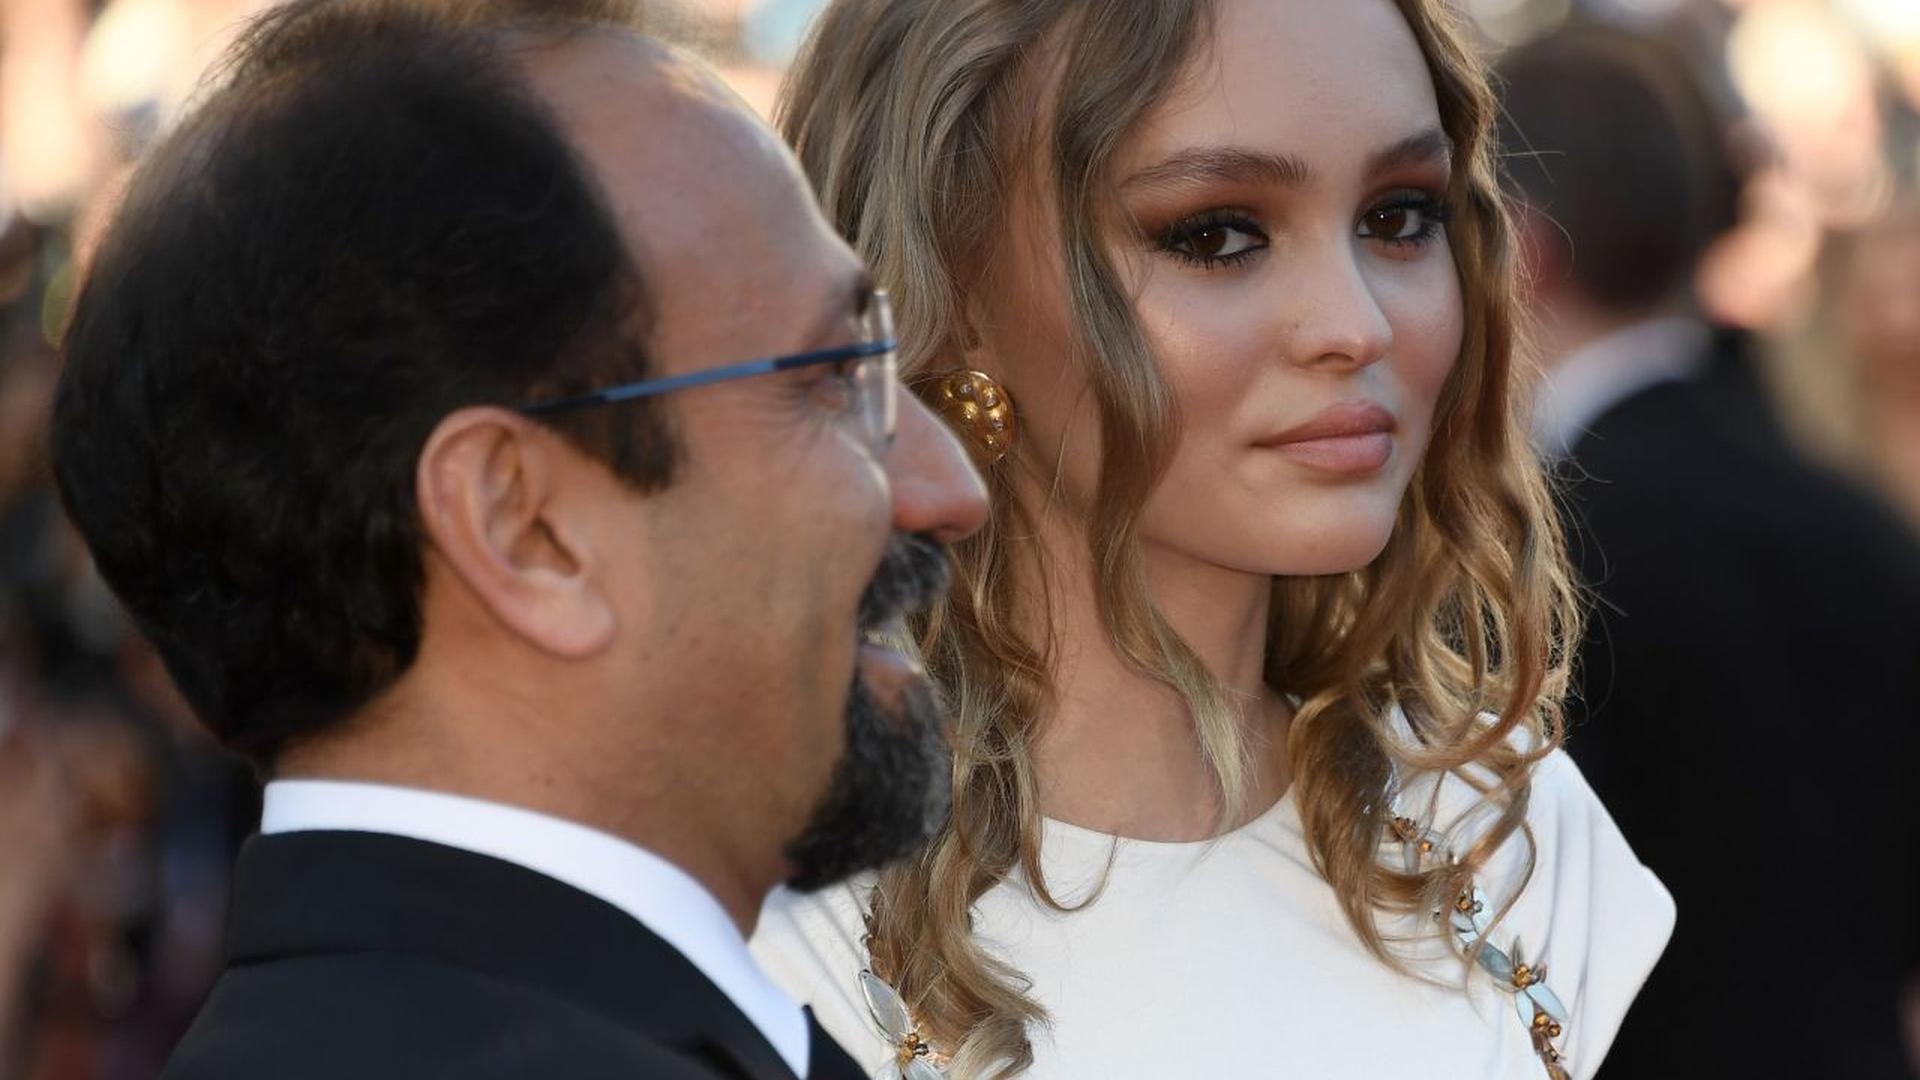 Lily-Rose Depp (R) and Iranian director Asghar Farhadi pose as they arrive on May 17, 2017 for the screening of the film 'Ismael's Ghosts' (Les Fantomes d'Ismael) during the opening ceremony of the 70th edition of the Cannes Film Festival in Cannes, southern France.  / AFP PHOTO / Anne-Christine POUJOULAT